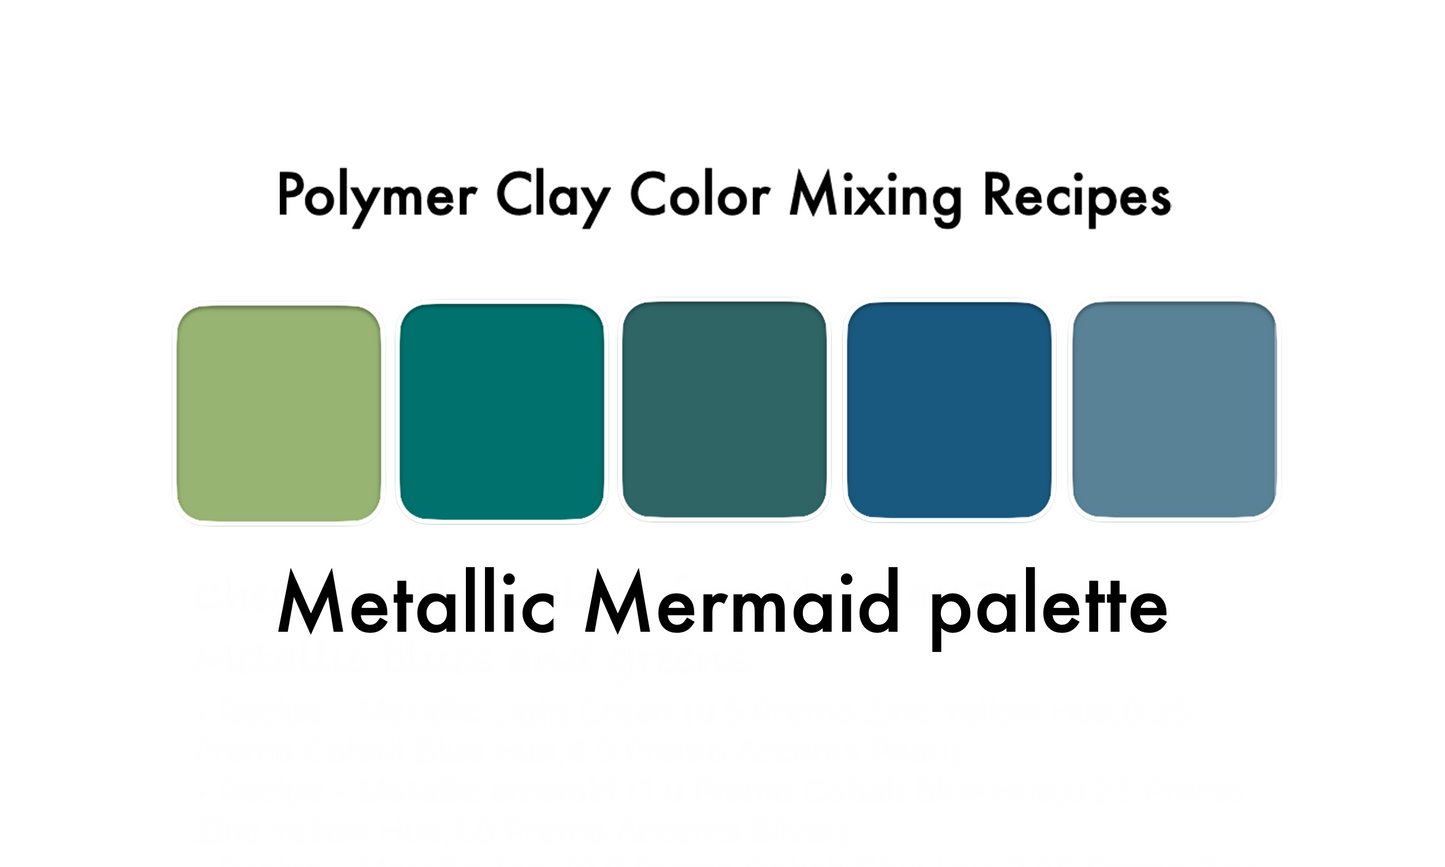 Polymer clay recipes for Sculpey Premo clay - Metallic Mermaid Colors